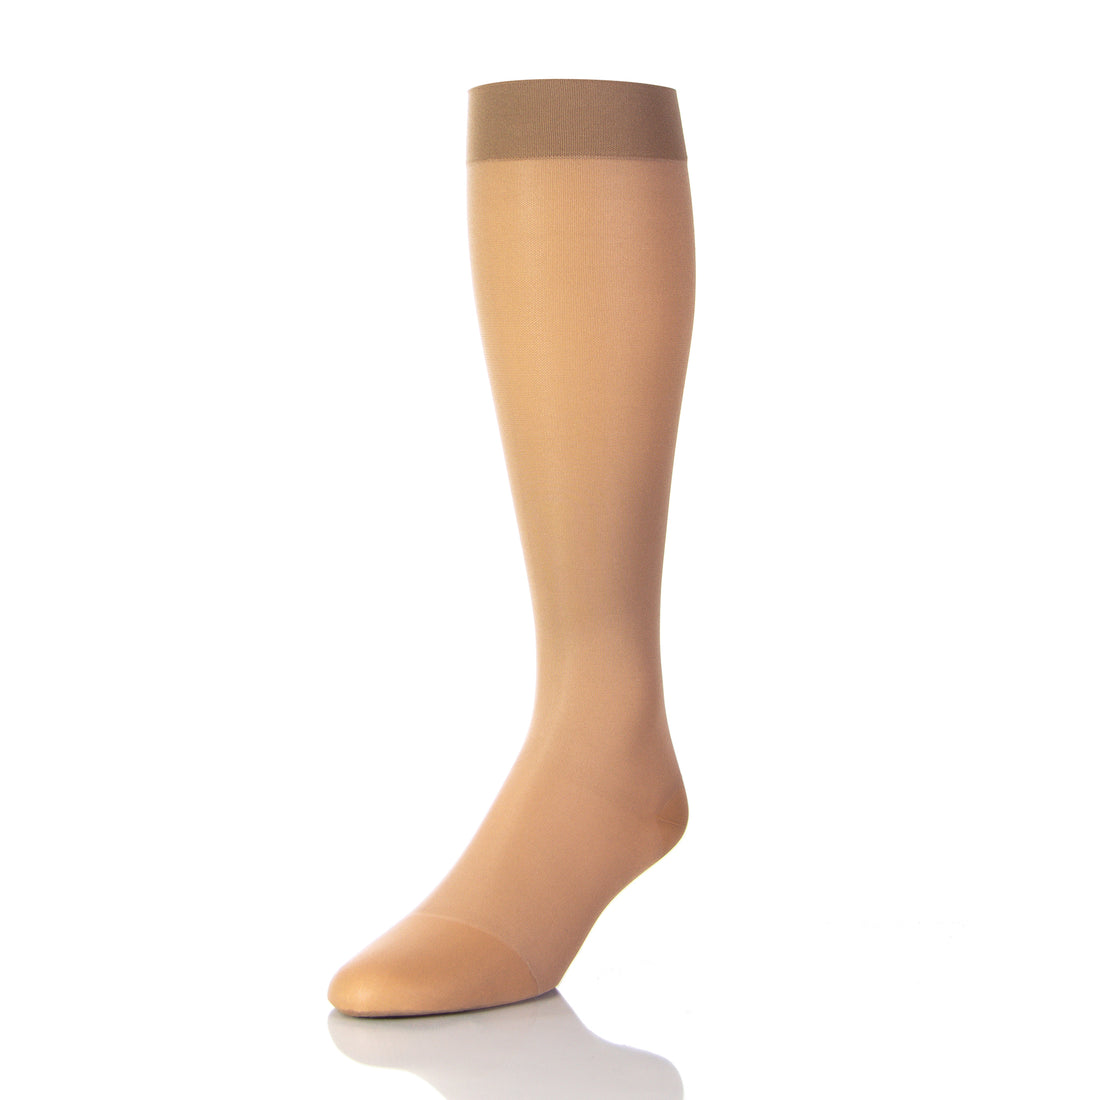 Compression Stockings For DVT